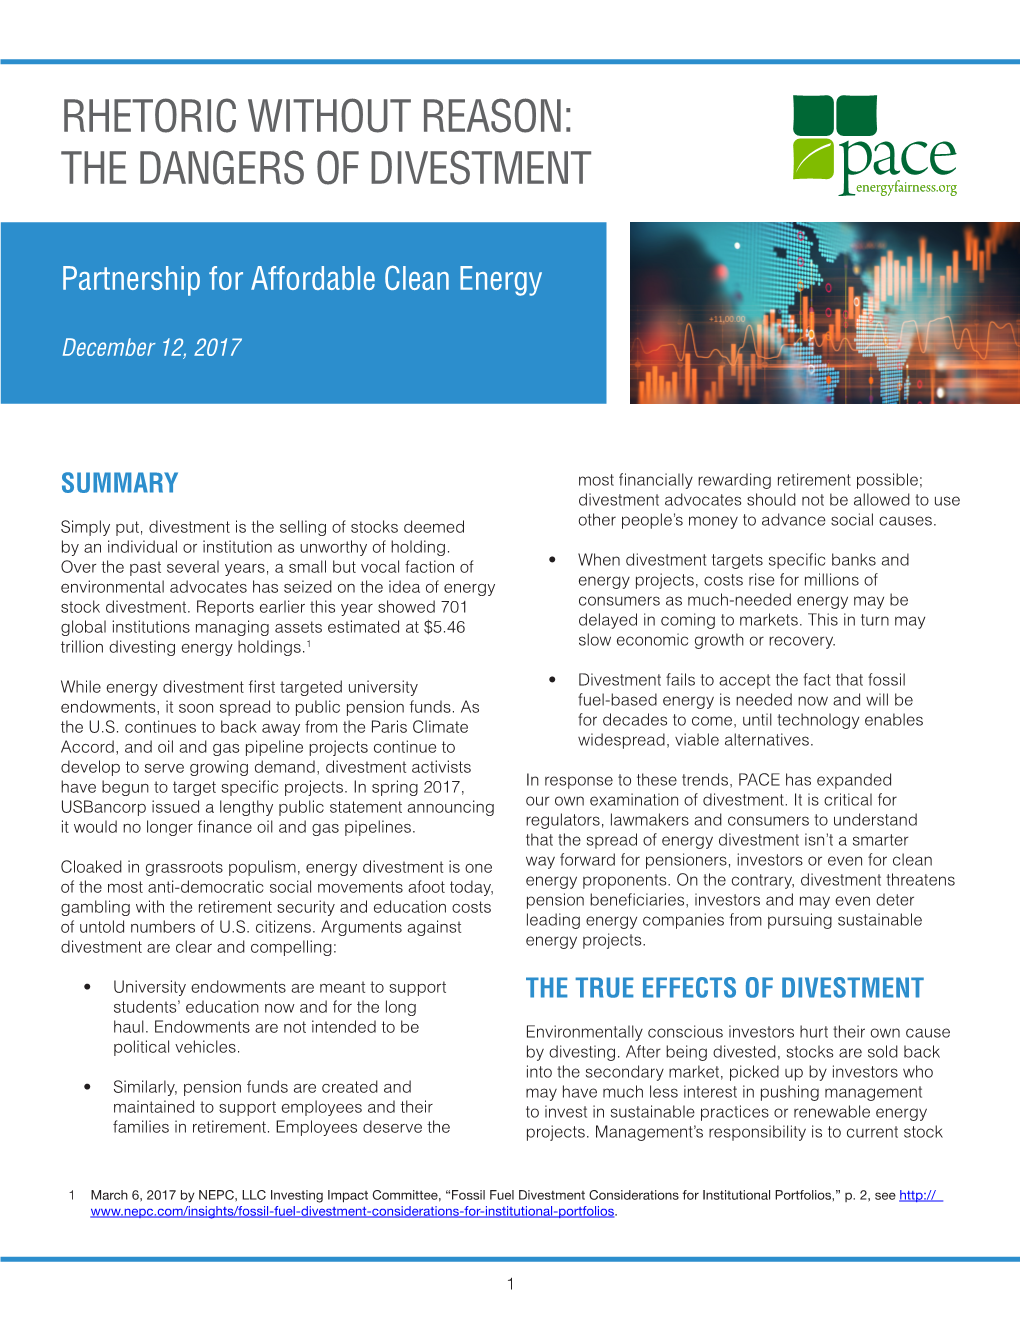 The Dangers of Divestment